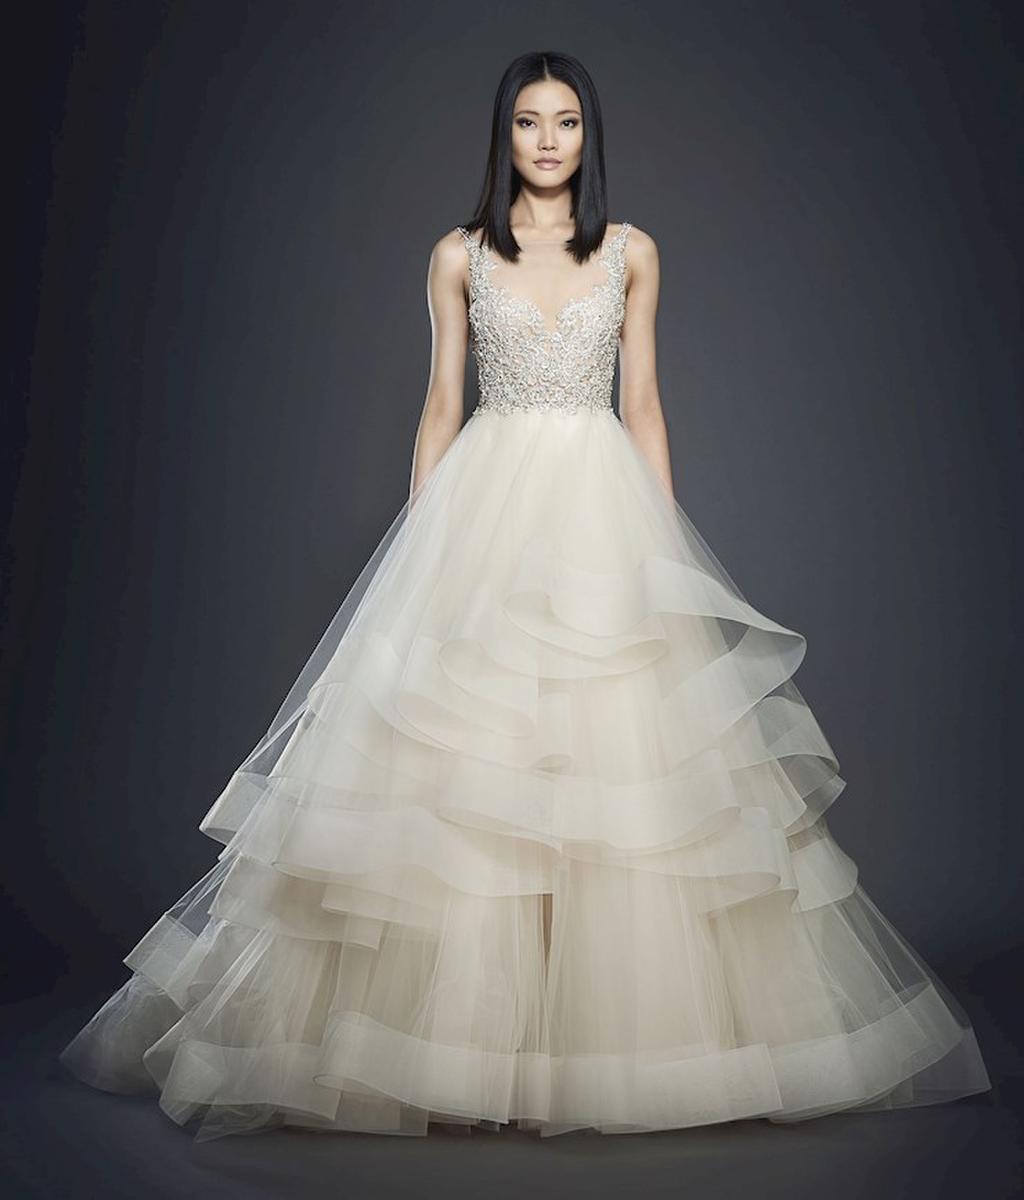 Lazaro Wedding Gowns | The Bridal Collection in Denver, CO